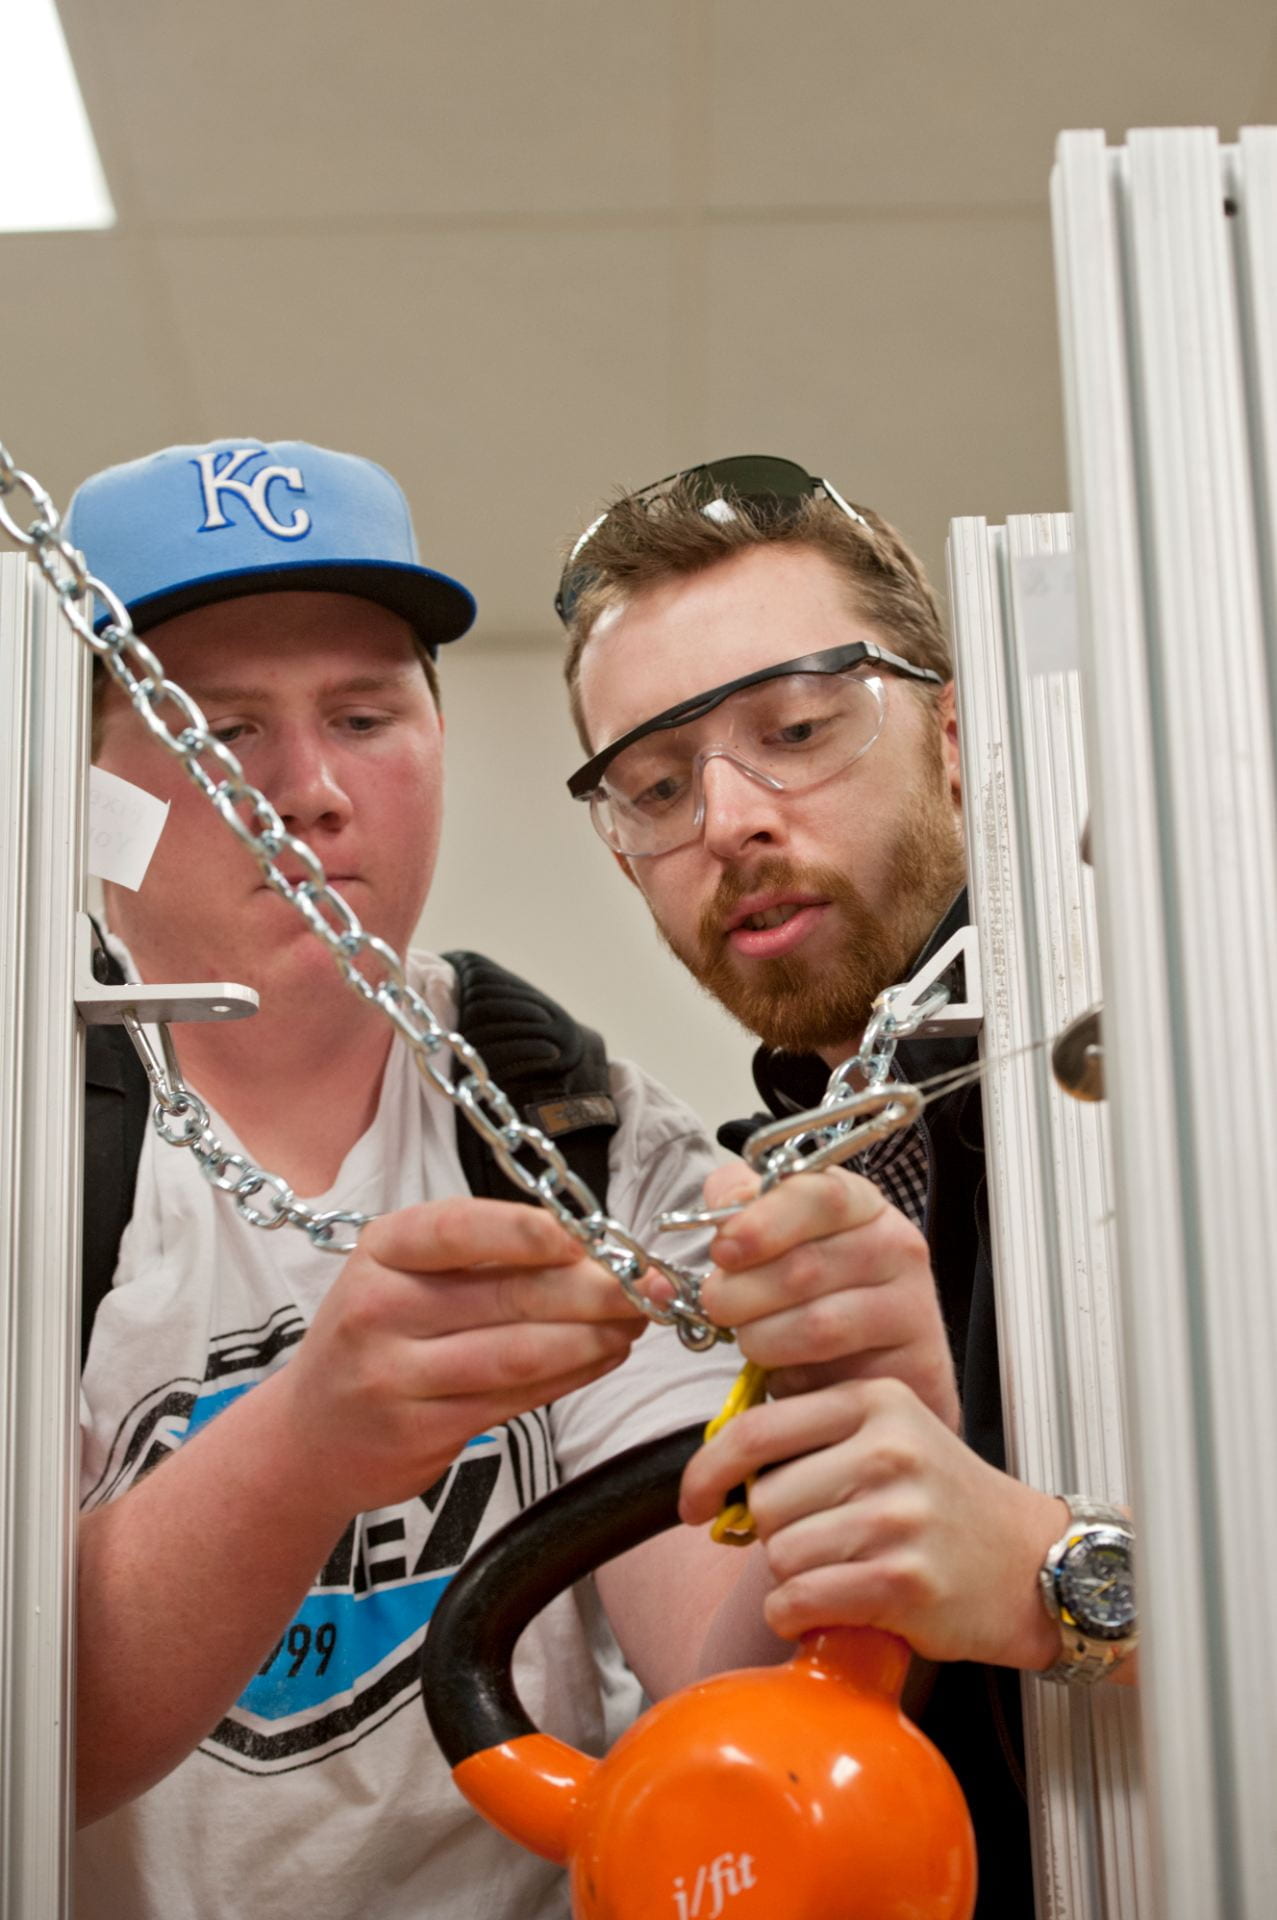 Two students apply their knowledge to a performance task in a mechanical engineering course involving chains and blocks.